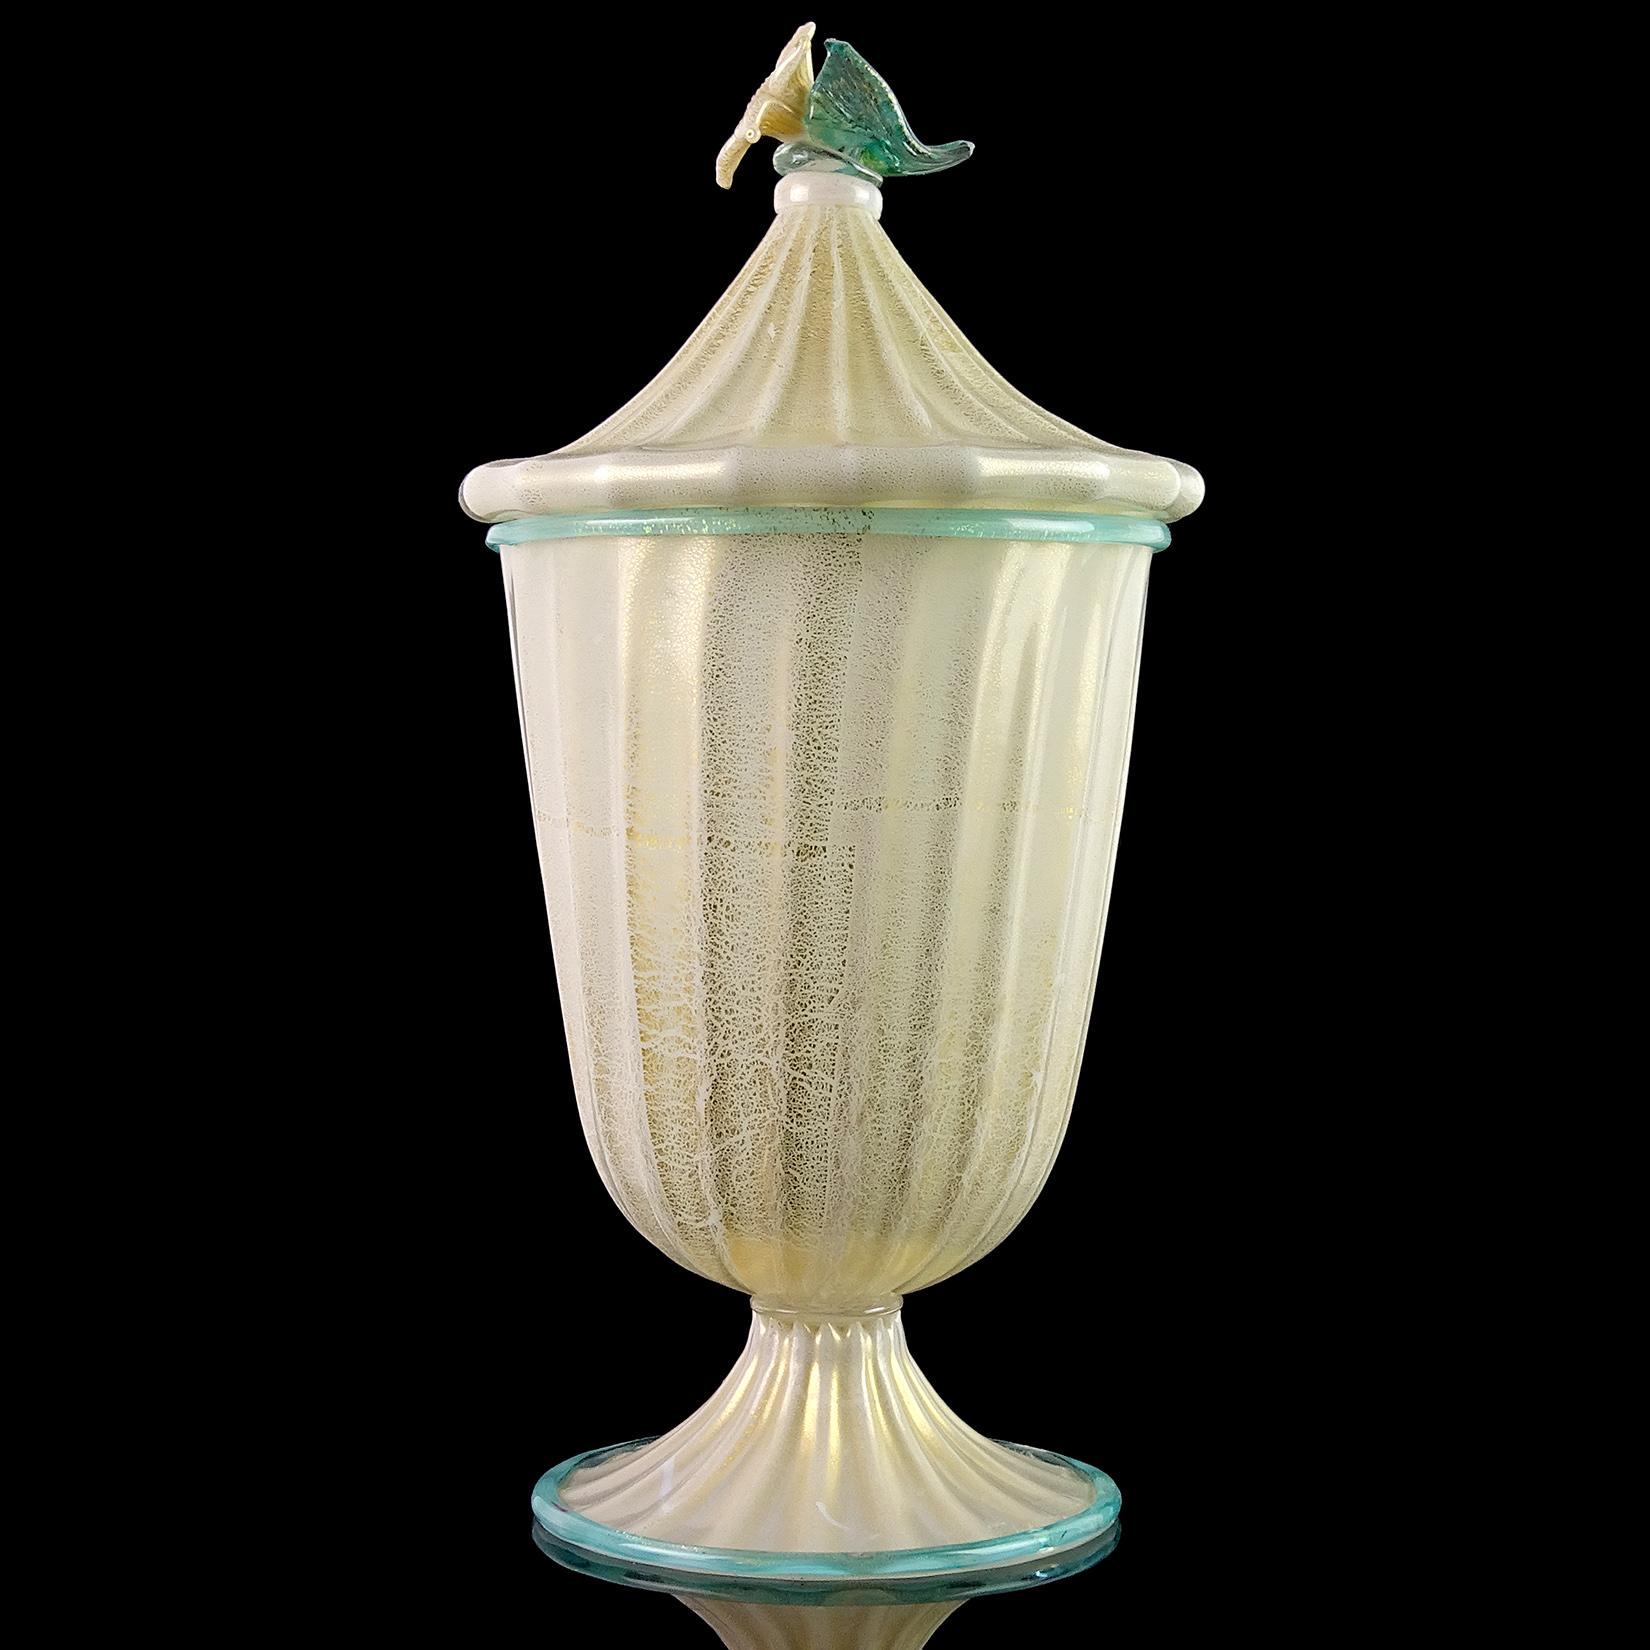 Gorgeous and large Murano hand blown white, aqua trim and gold flecks Italian art glass jar / container with flower top decoration. Attributed to the Barovier e Toso company. In the style of early Vetreria Artistica Barovier pieces I have previously